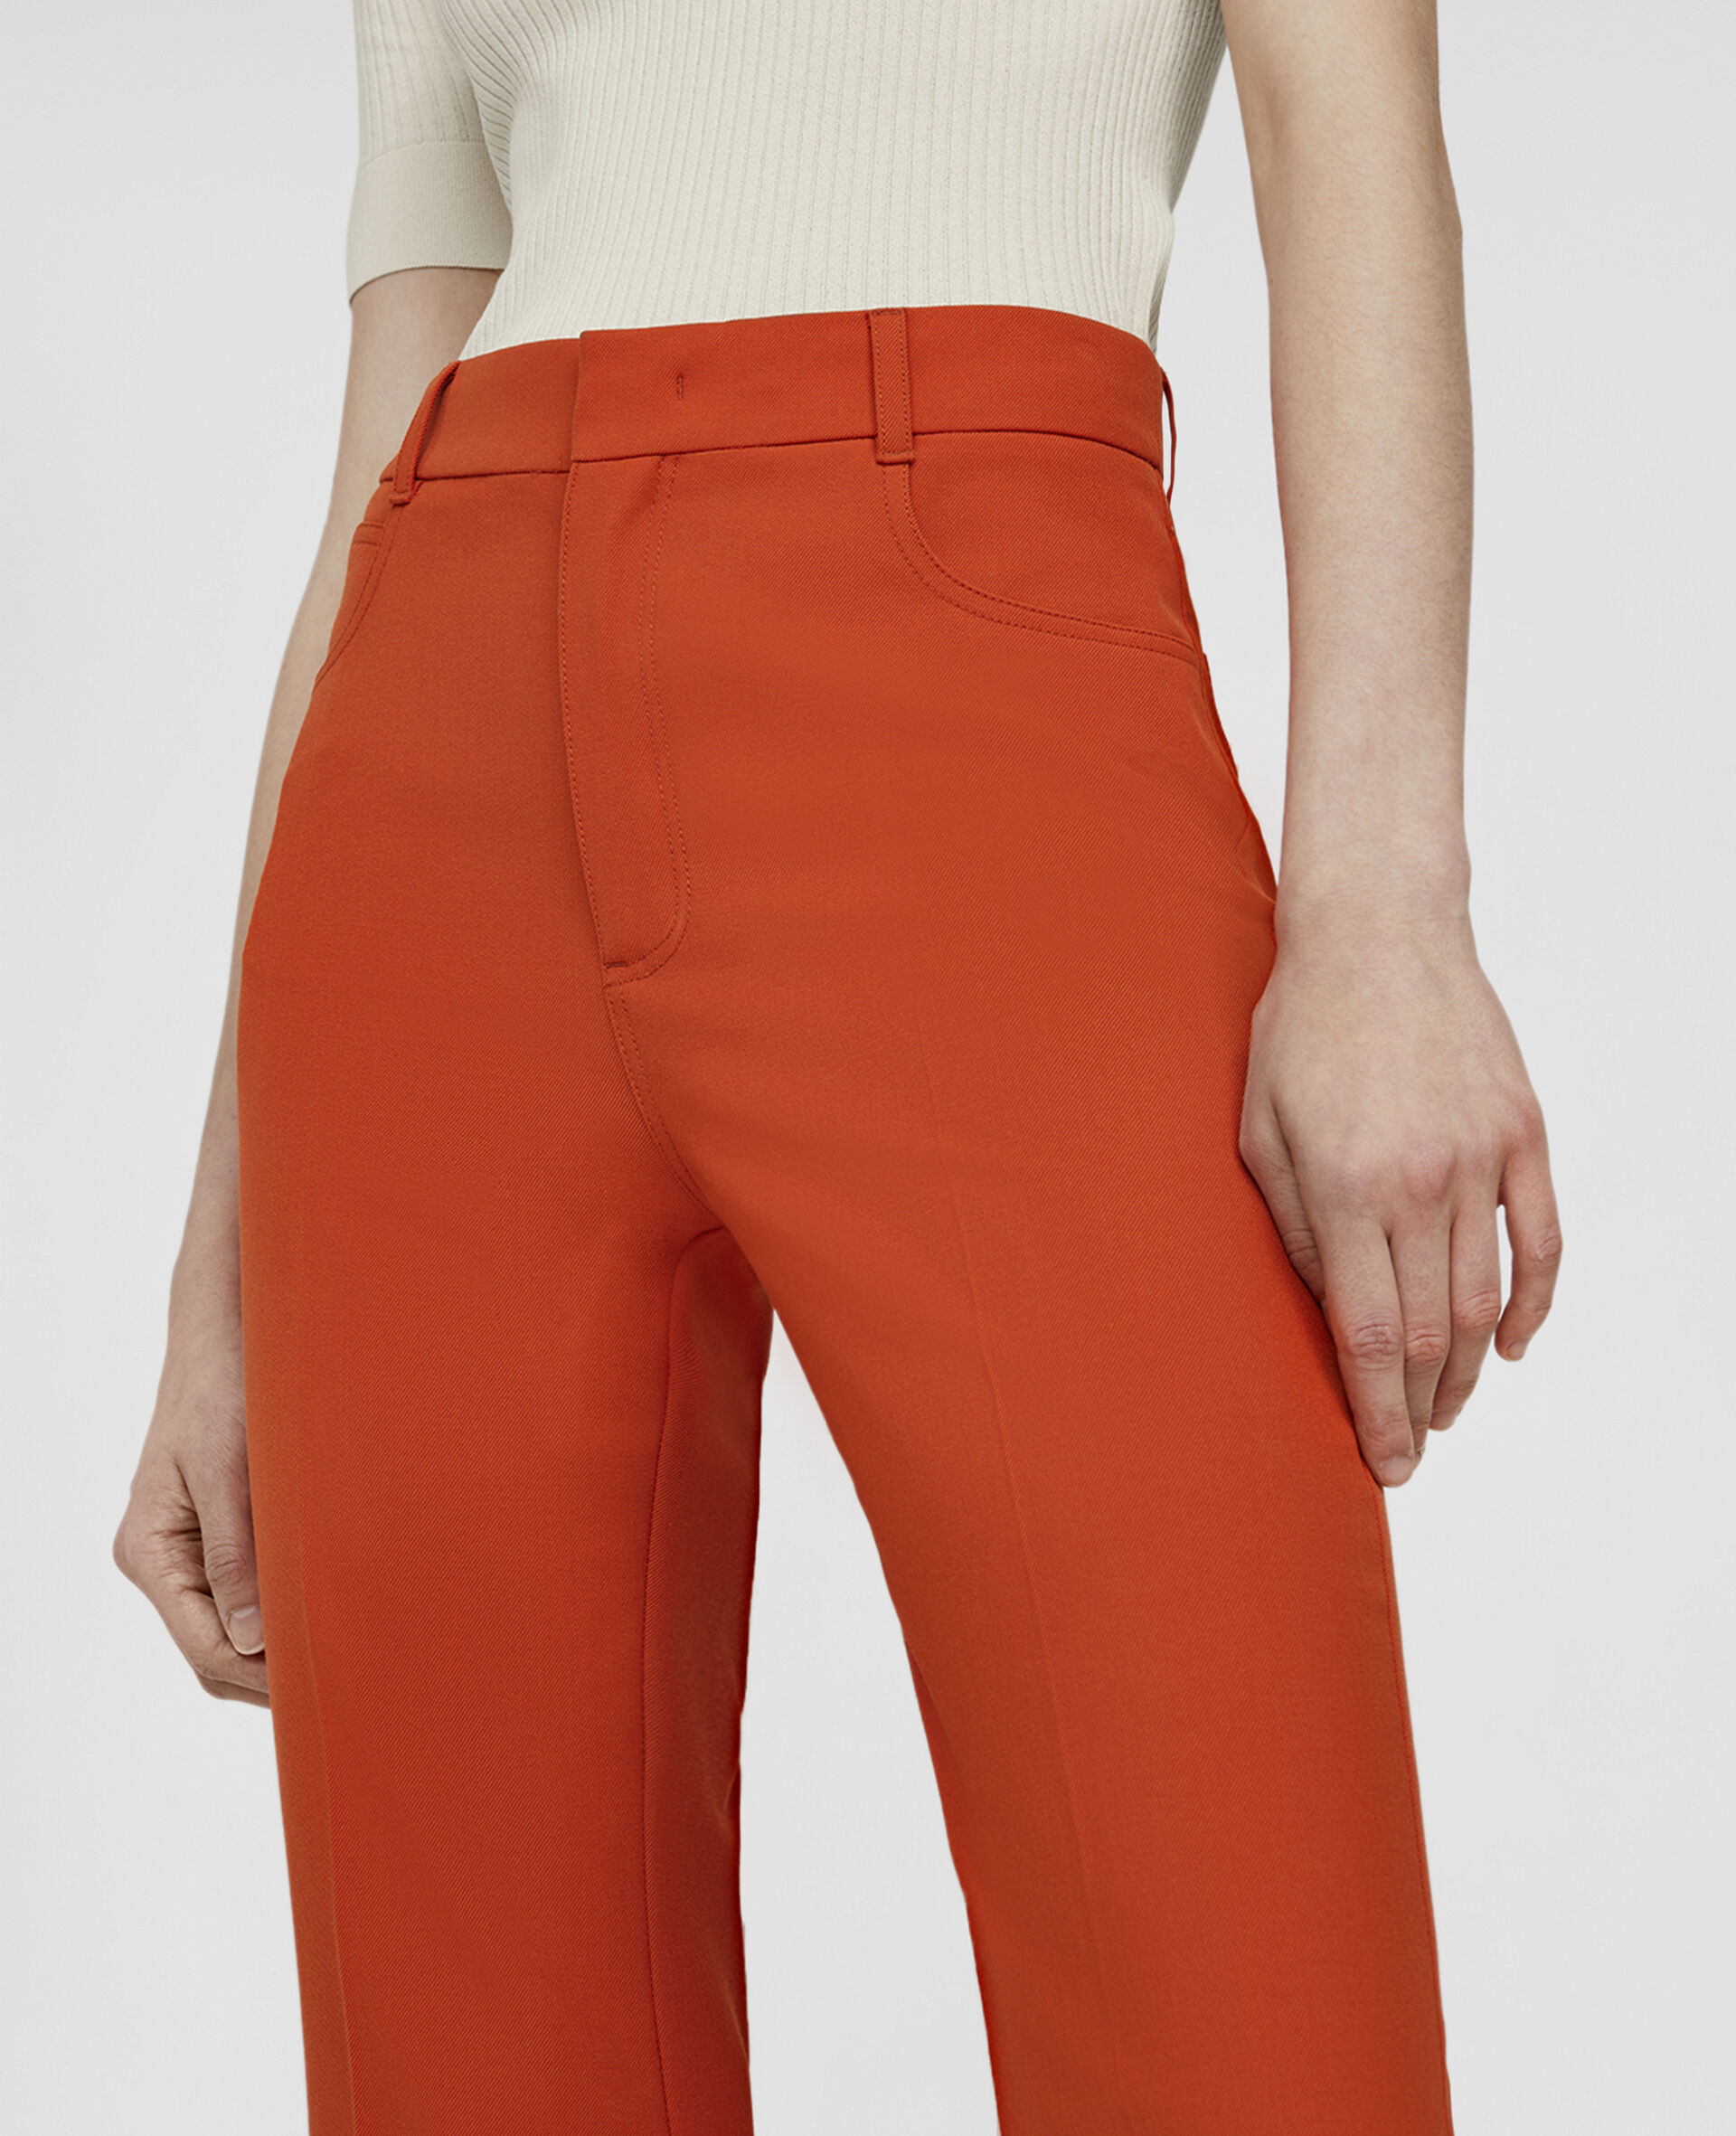 Twill Kick-Flare Tailored Trousers-Orange-large image number 3